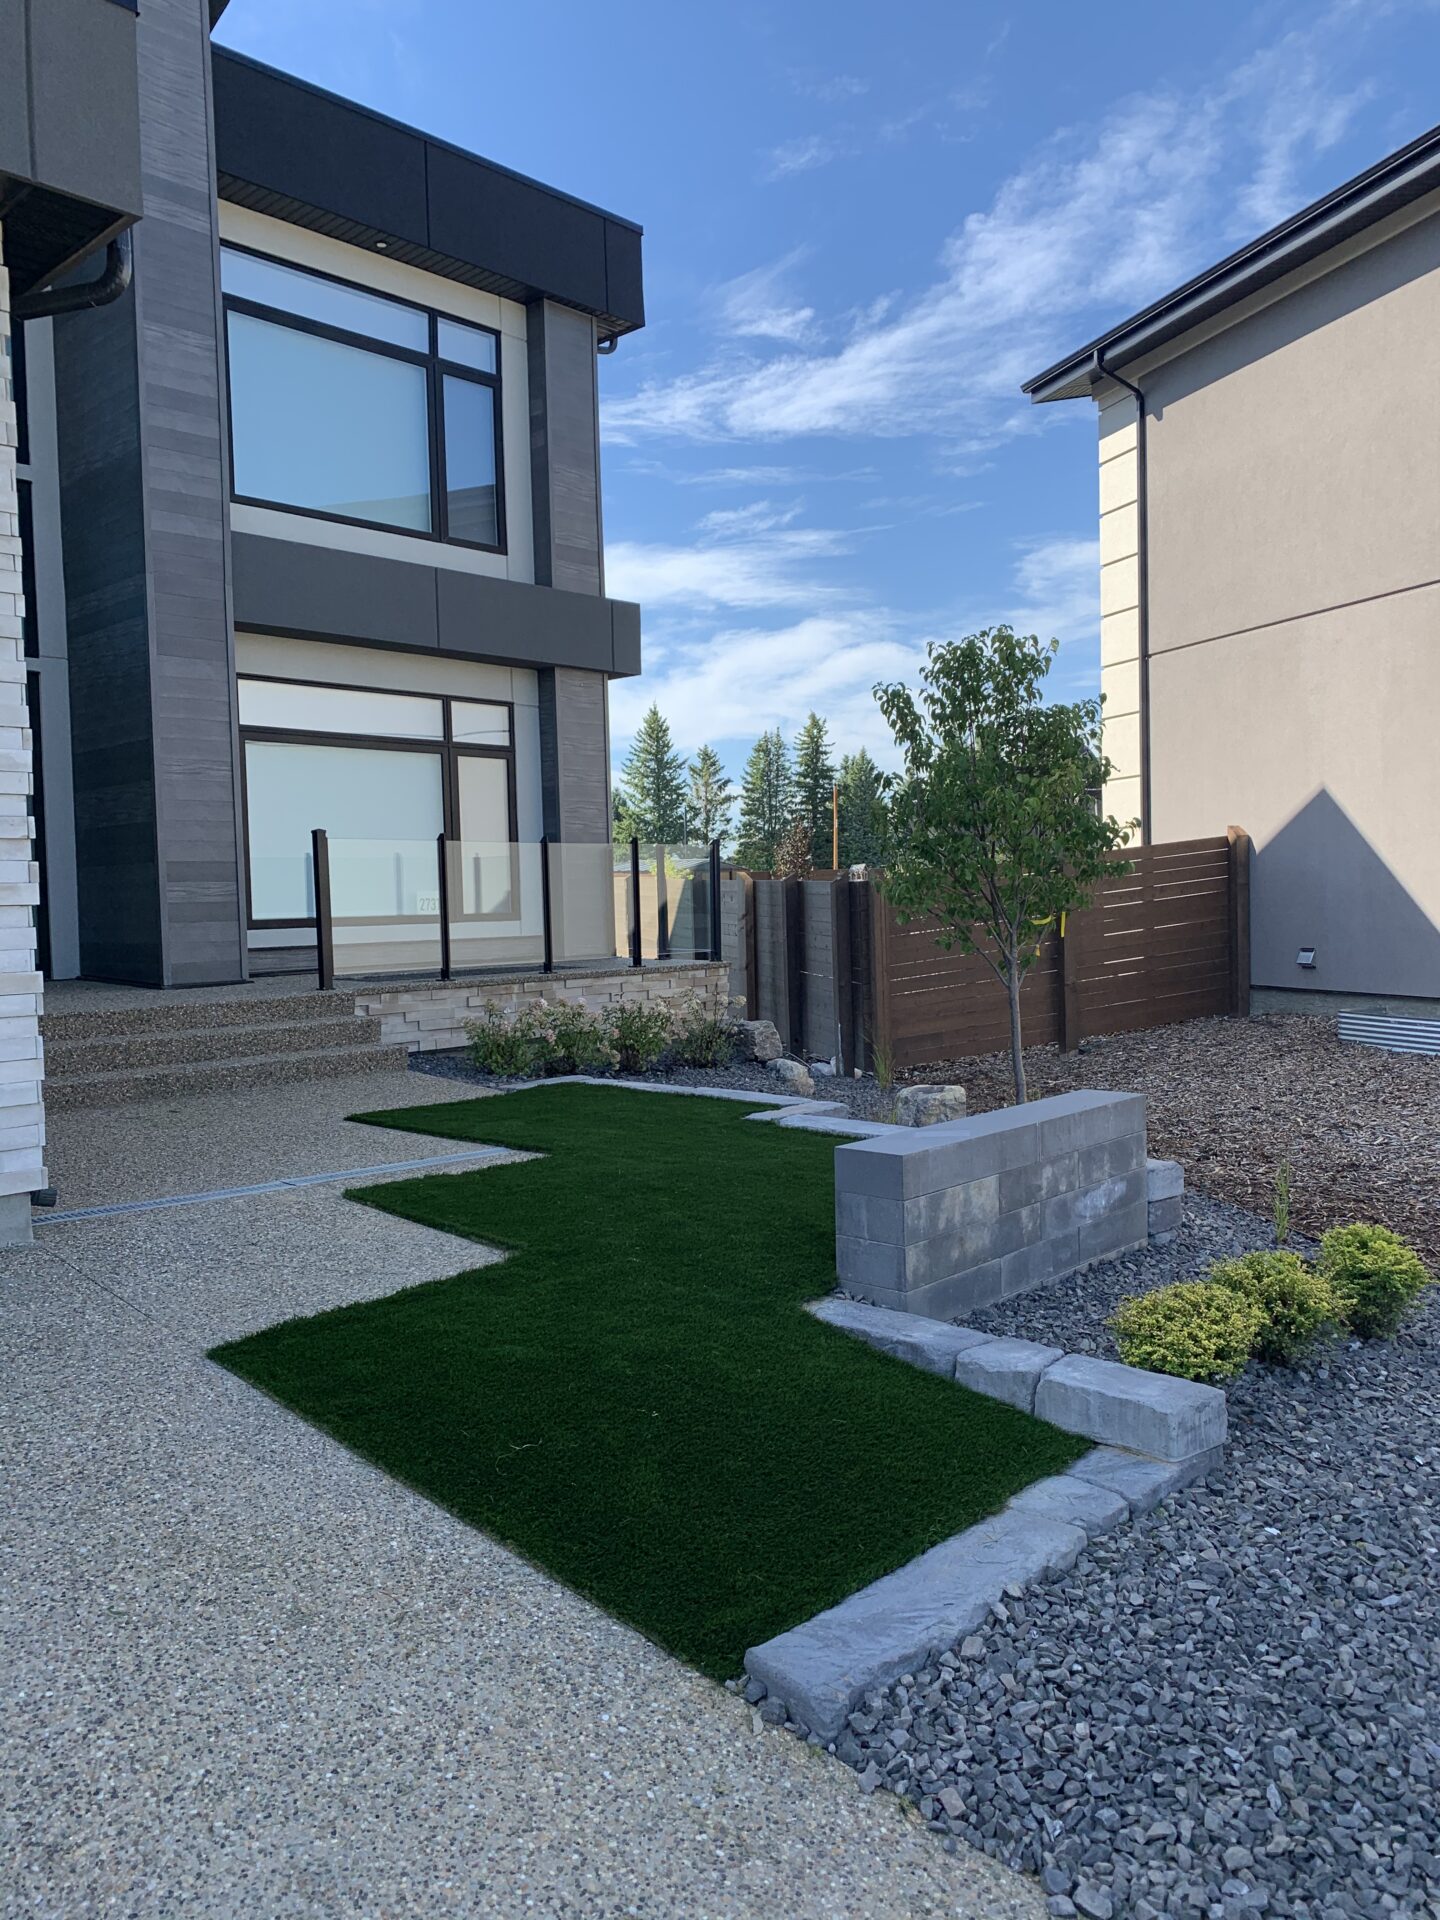 Stone and grass backyard landscaping ideas